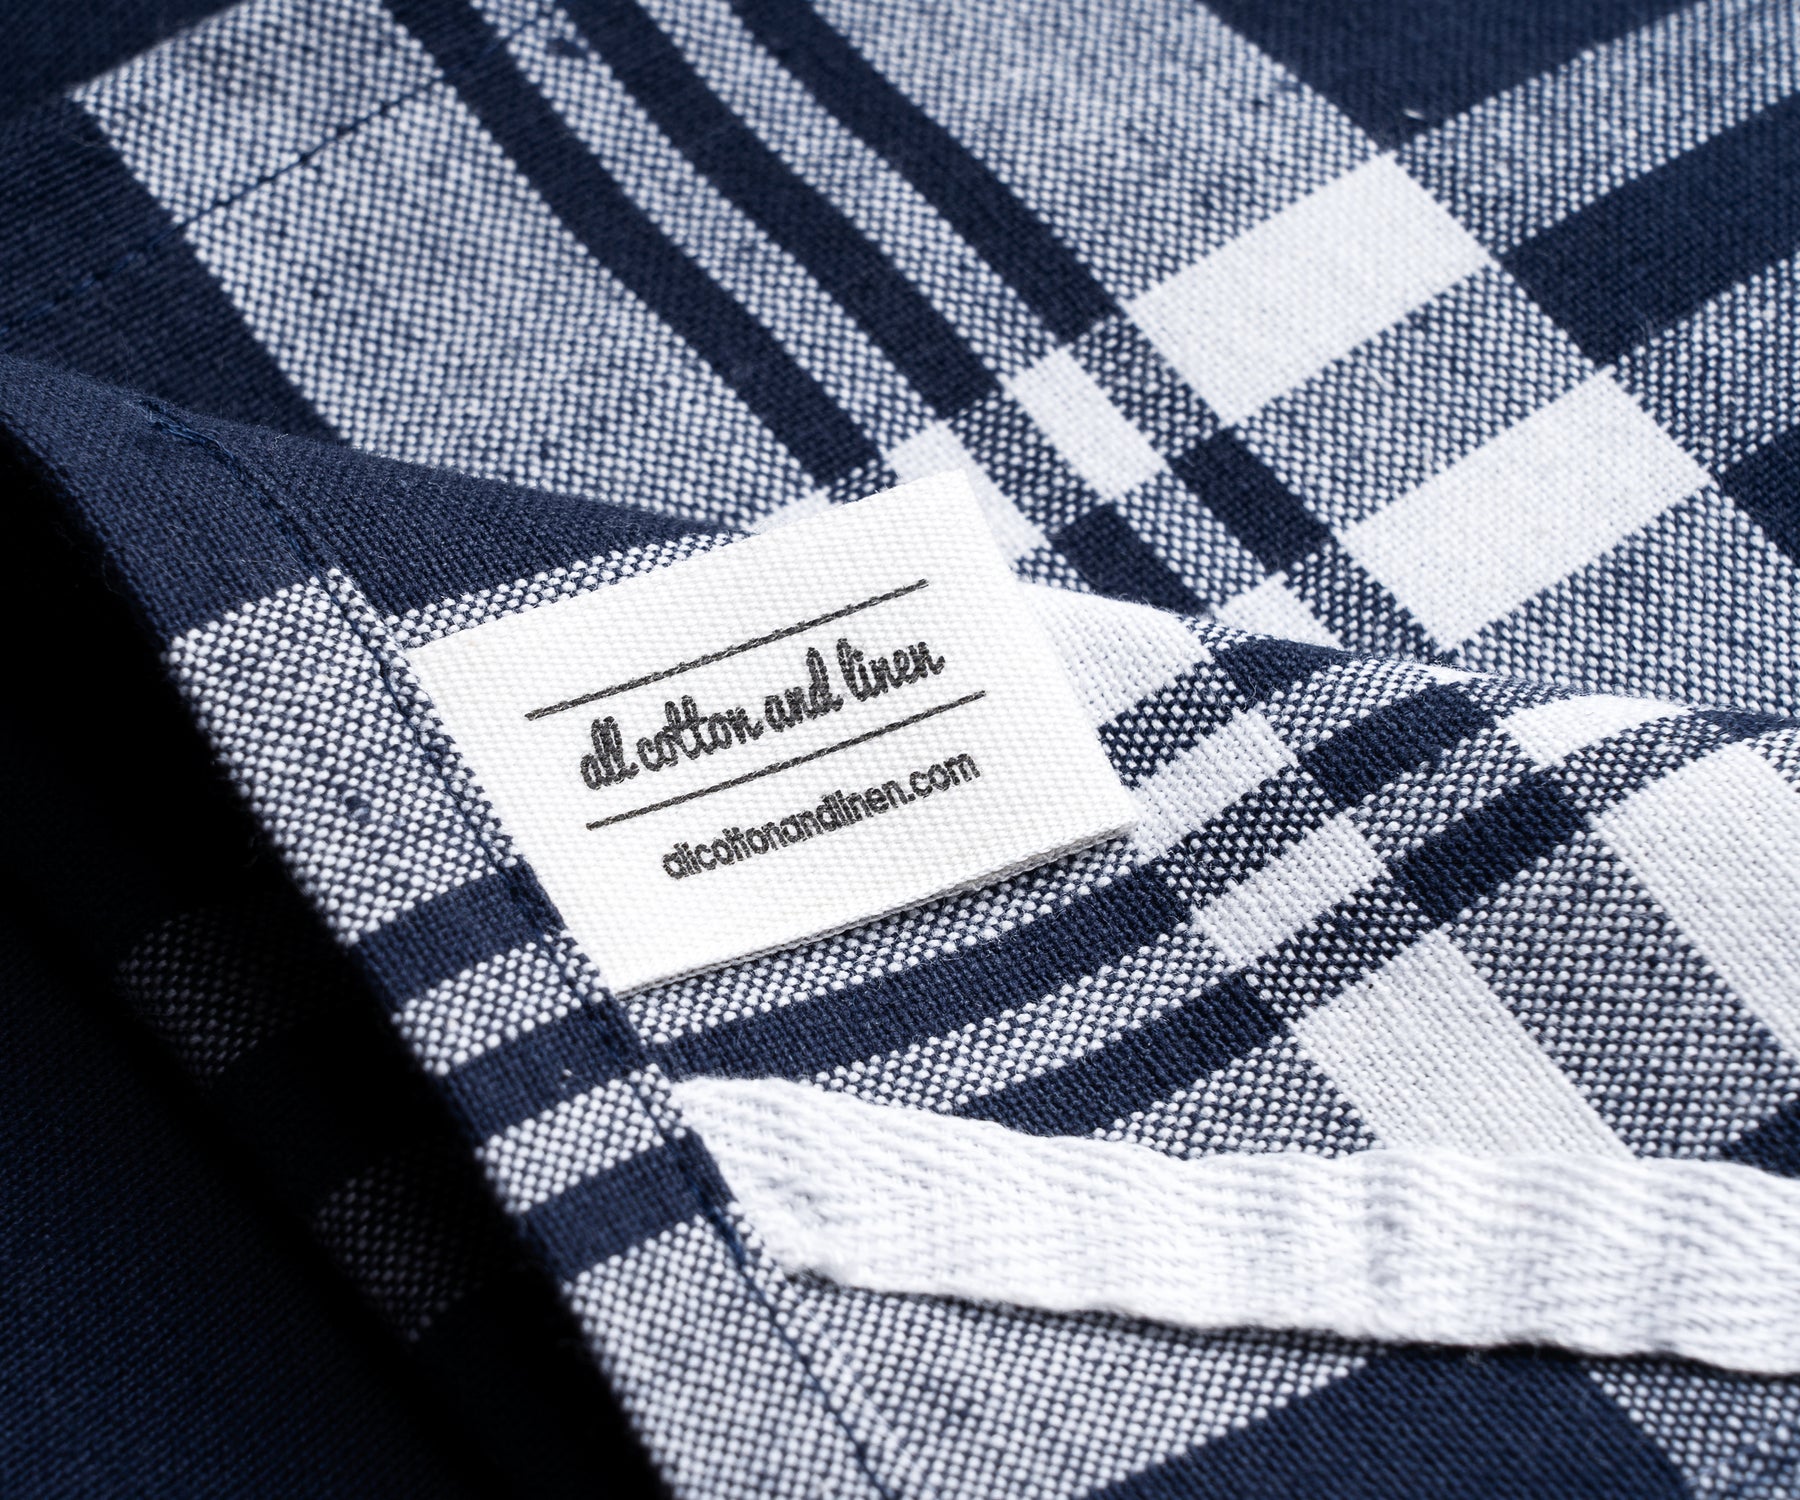 Detail of a farmhouse kitchen towel with blue and white gingham pattern